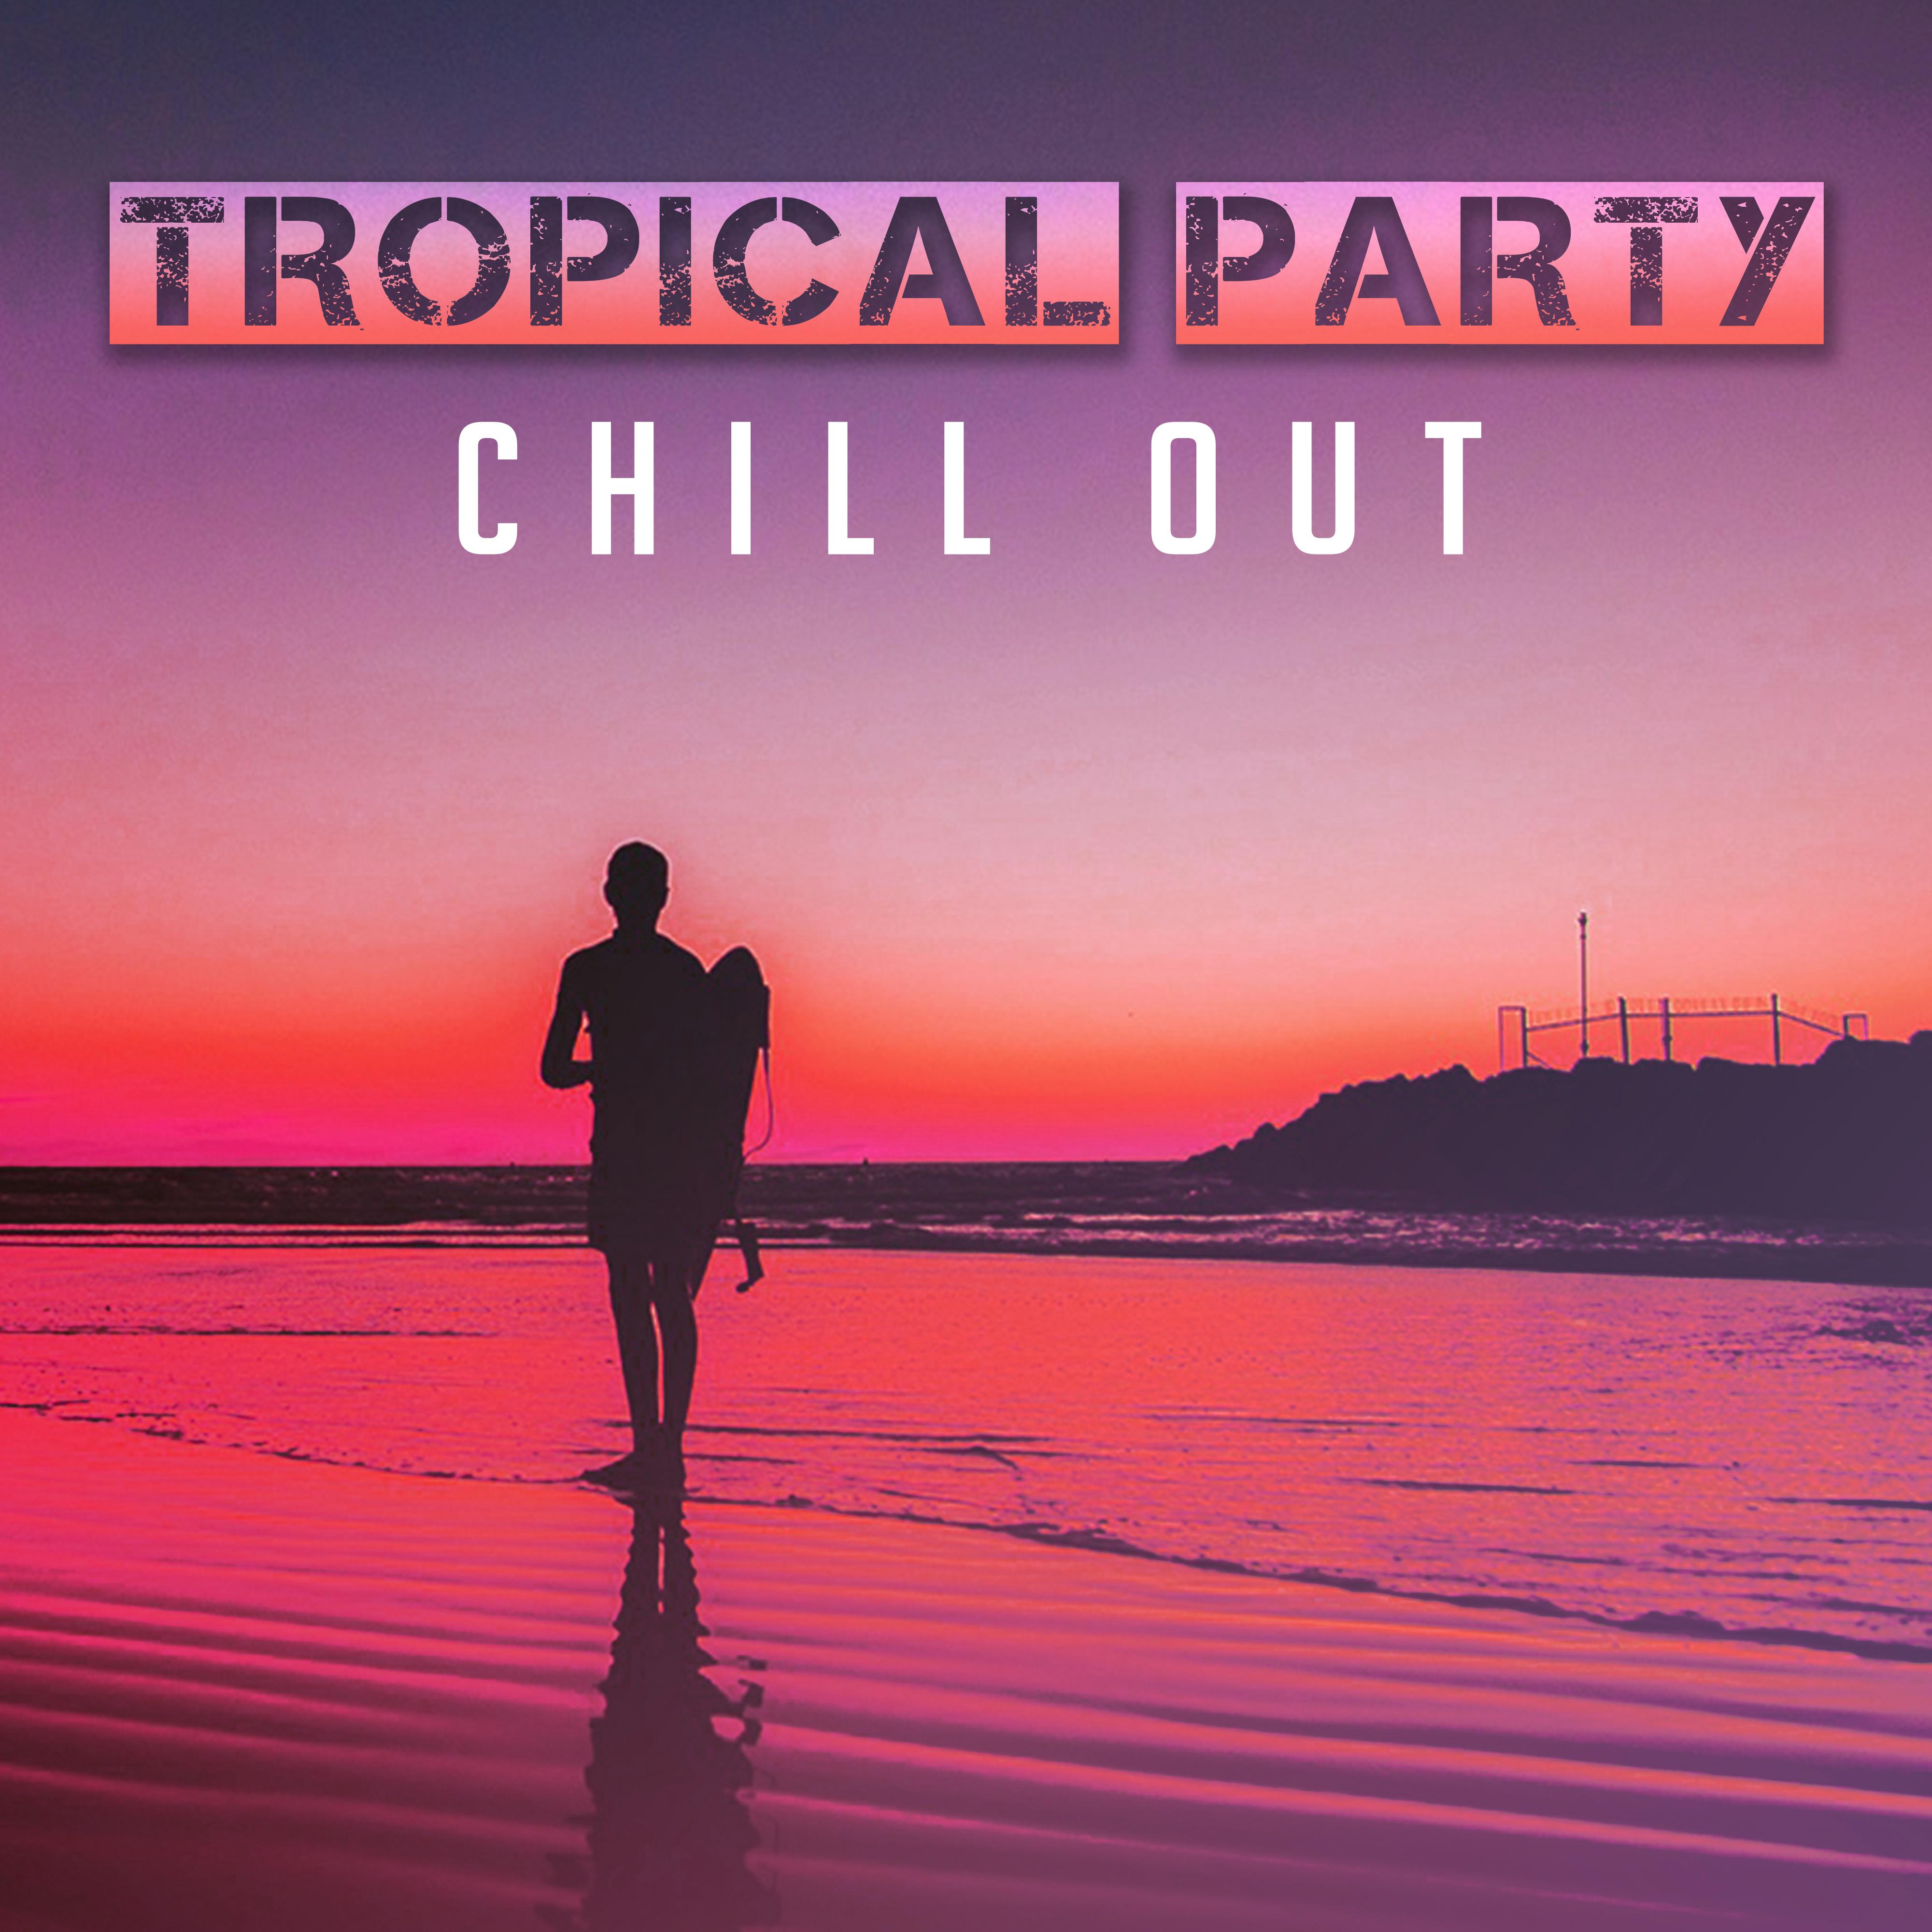 Tropical Party Chill Out  Summer Songs to Have Fun, Party Time, Beach Drinks, Holiday 2017